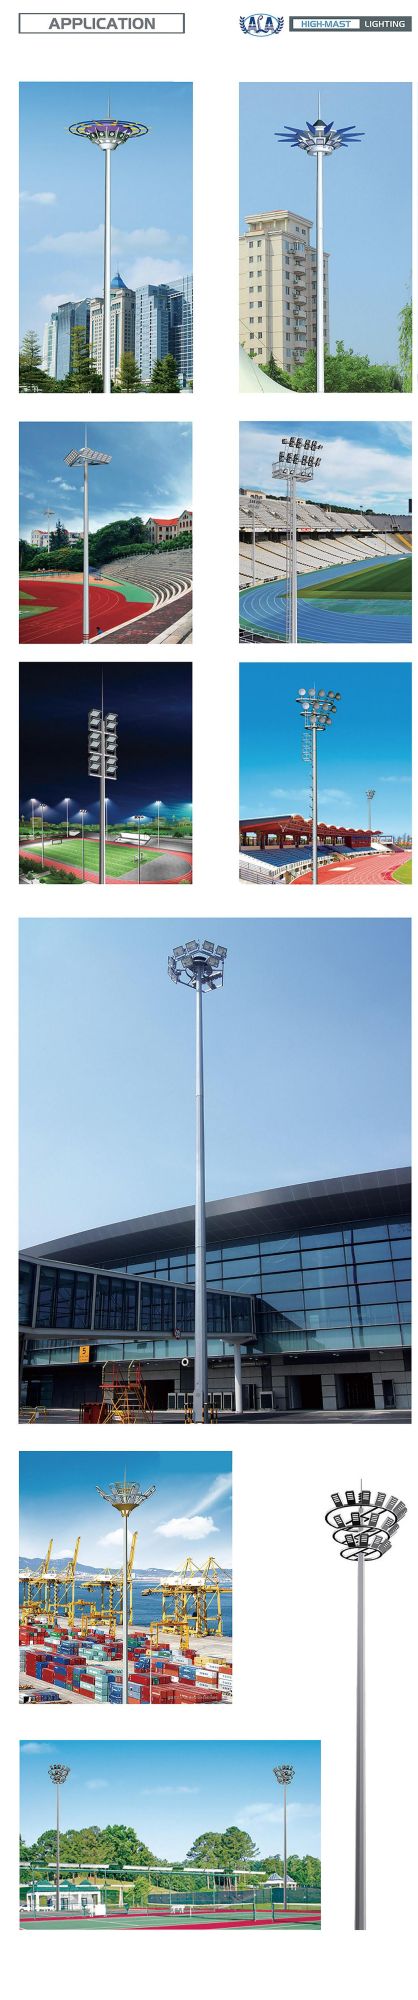 Ala 600W Airport Stadium High Mast Lamp with Raising and Lowering Device